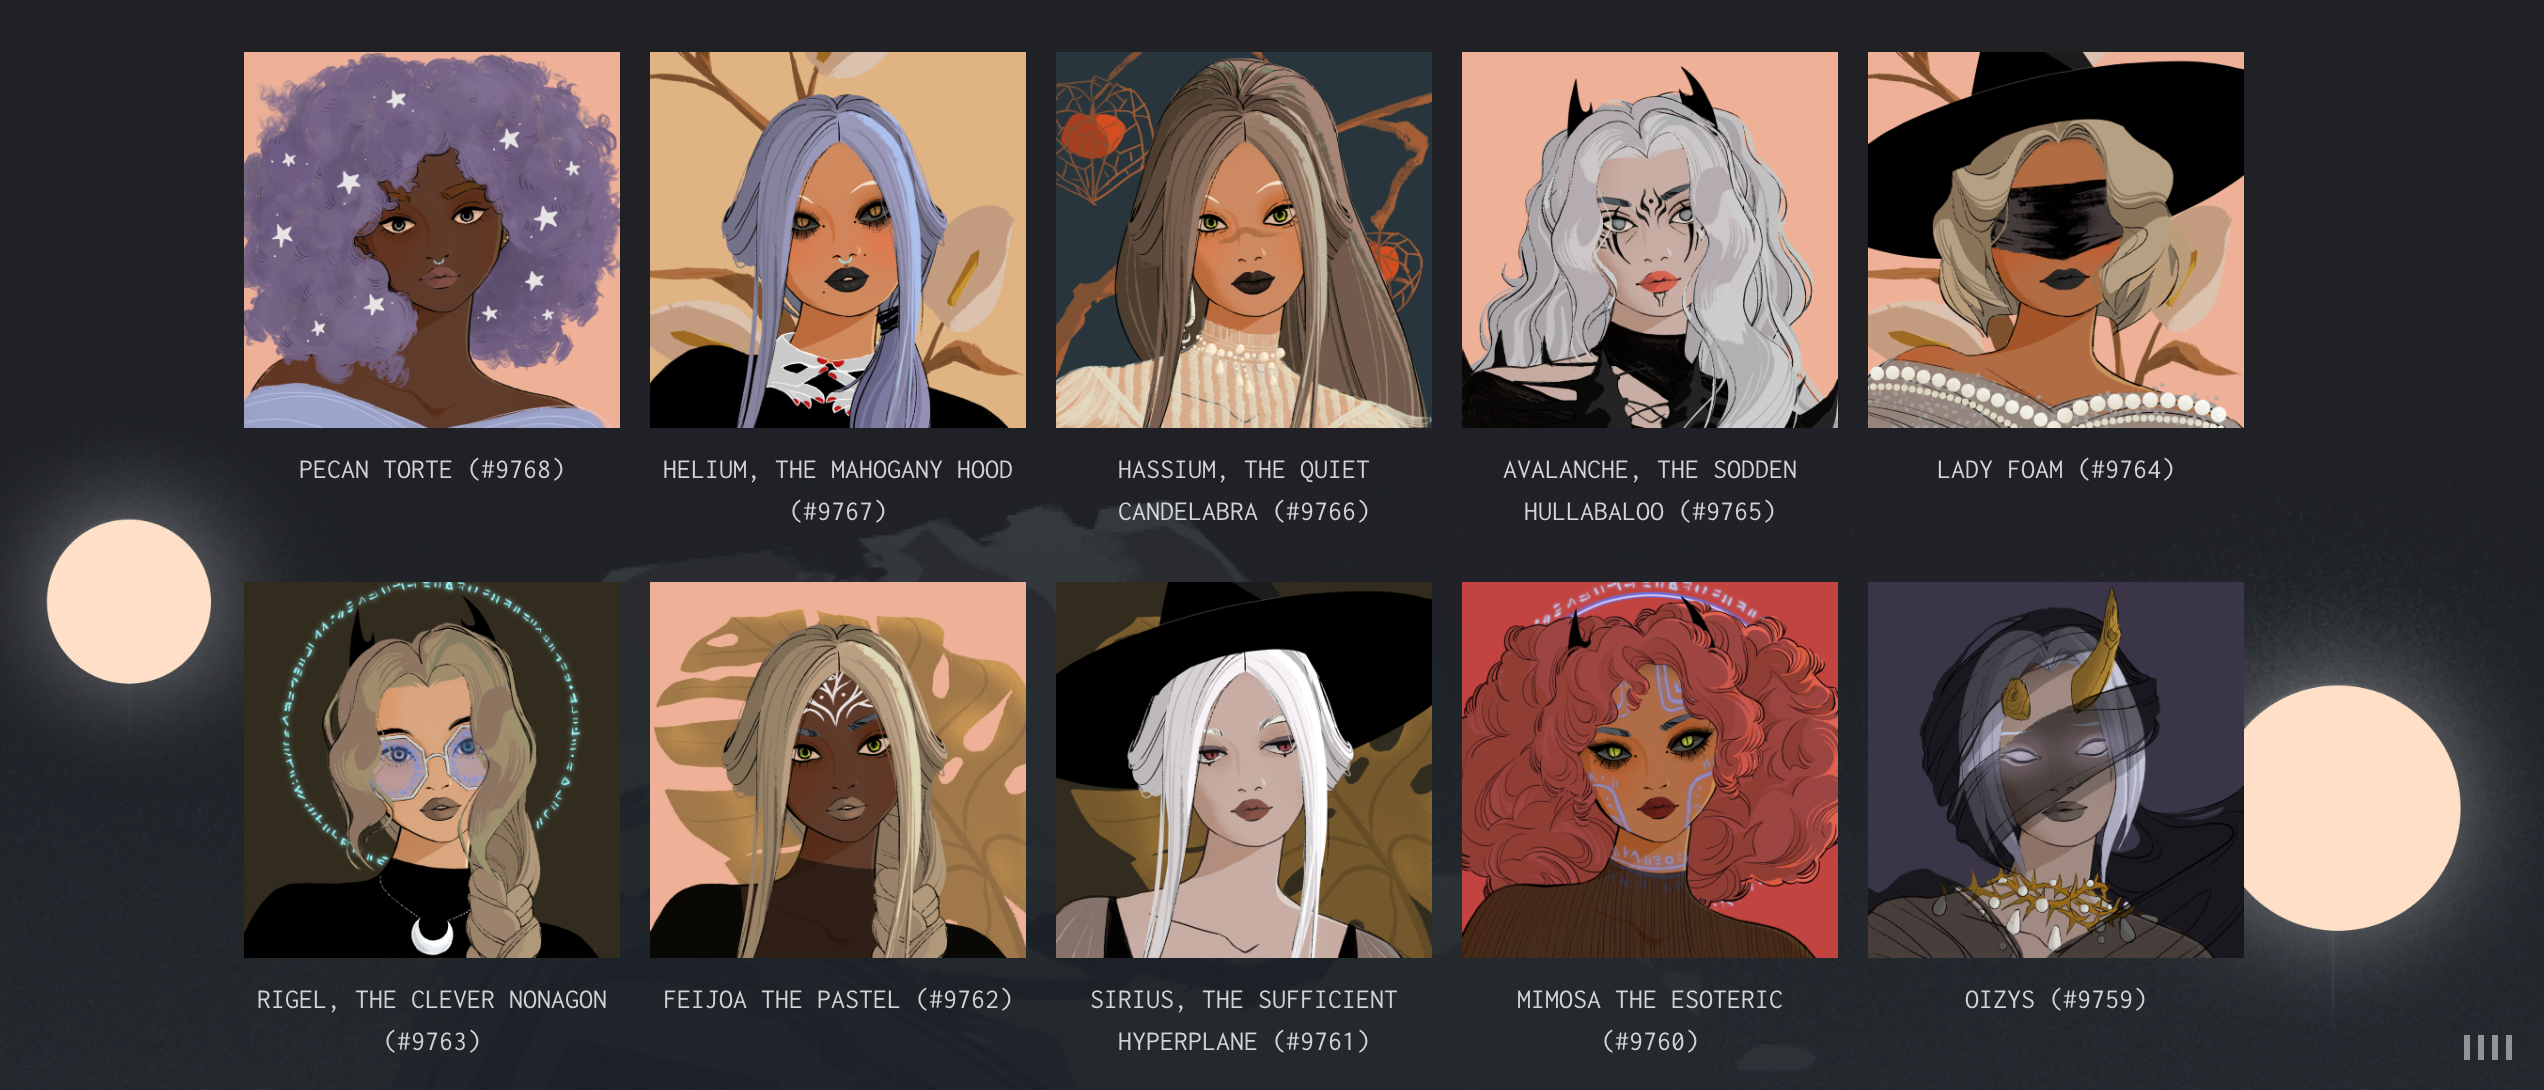 The witches of the coven, via: https://www.cryptocoven.xyz/witches